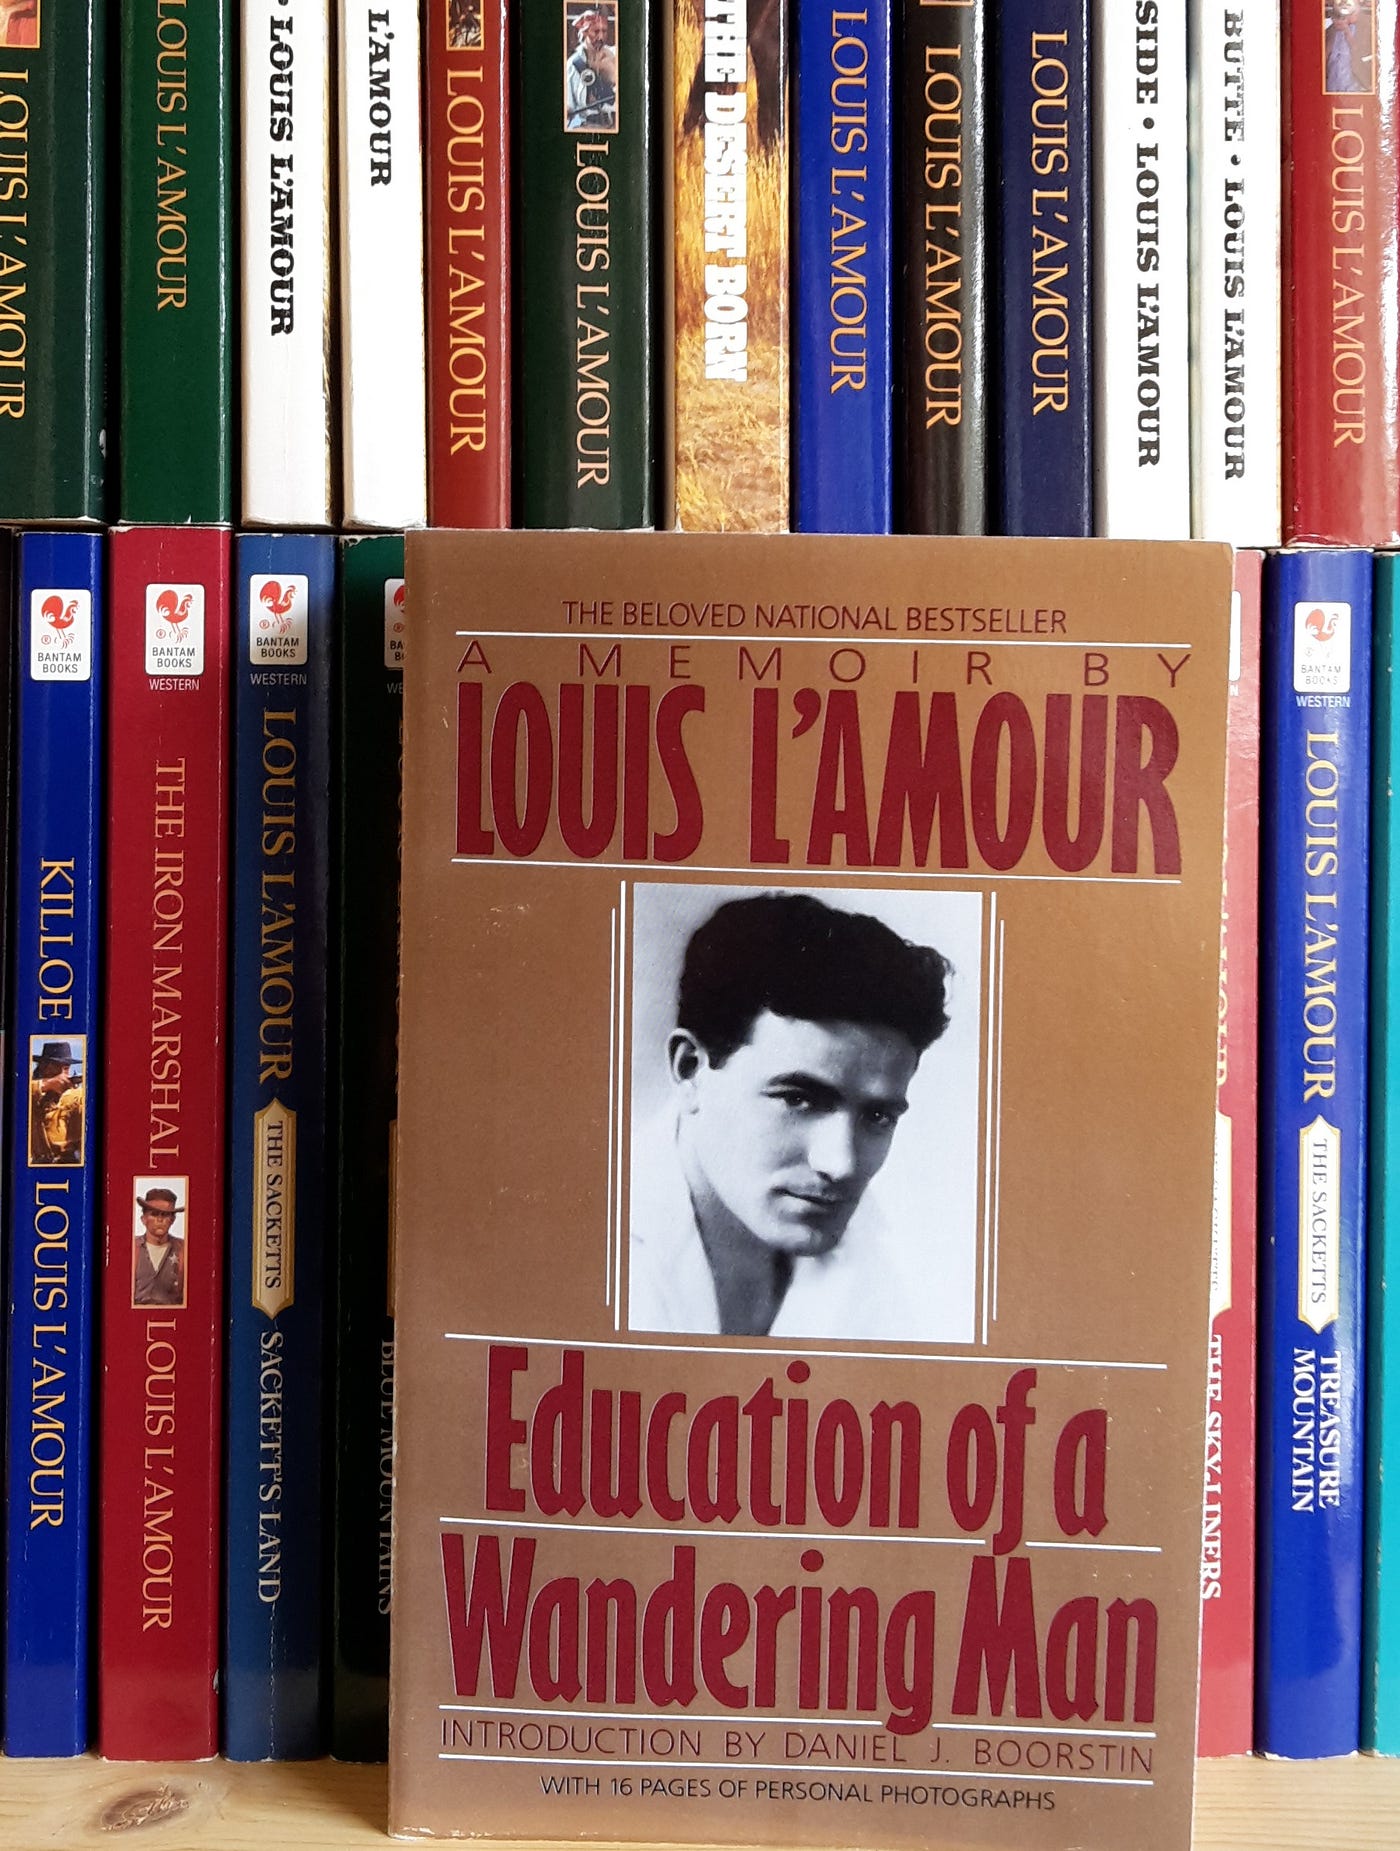 10 Lessons Writers Can Learn From Louis L'Amour, by Ryan Mizzen